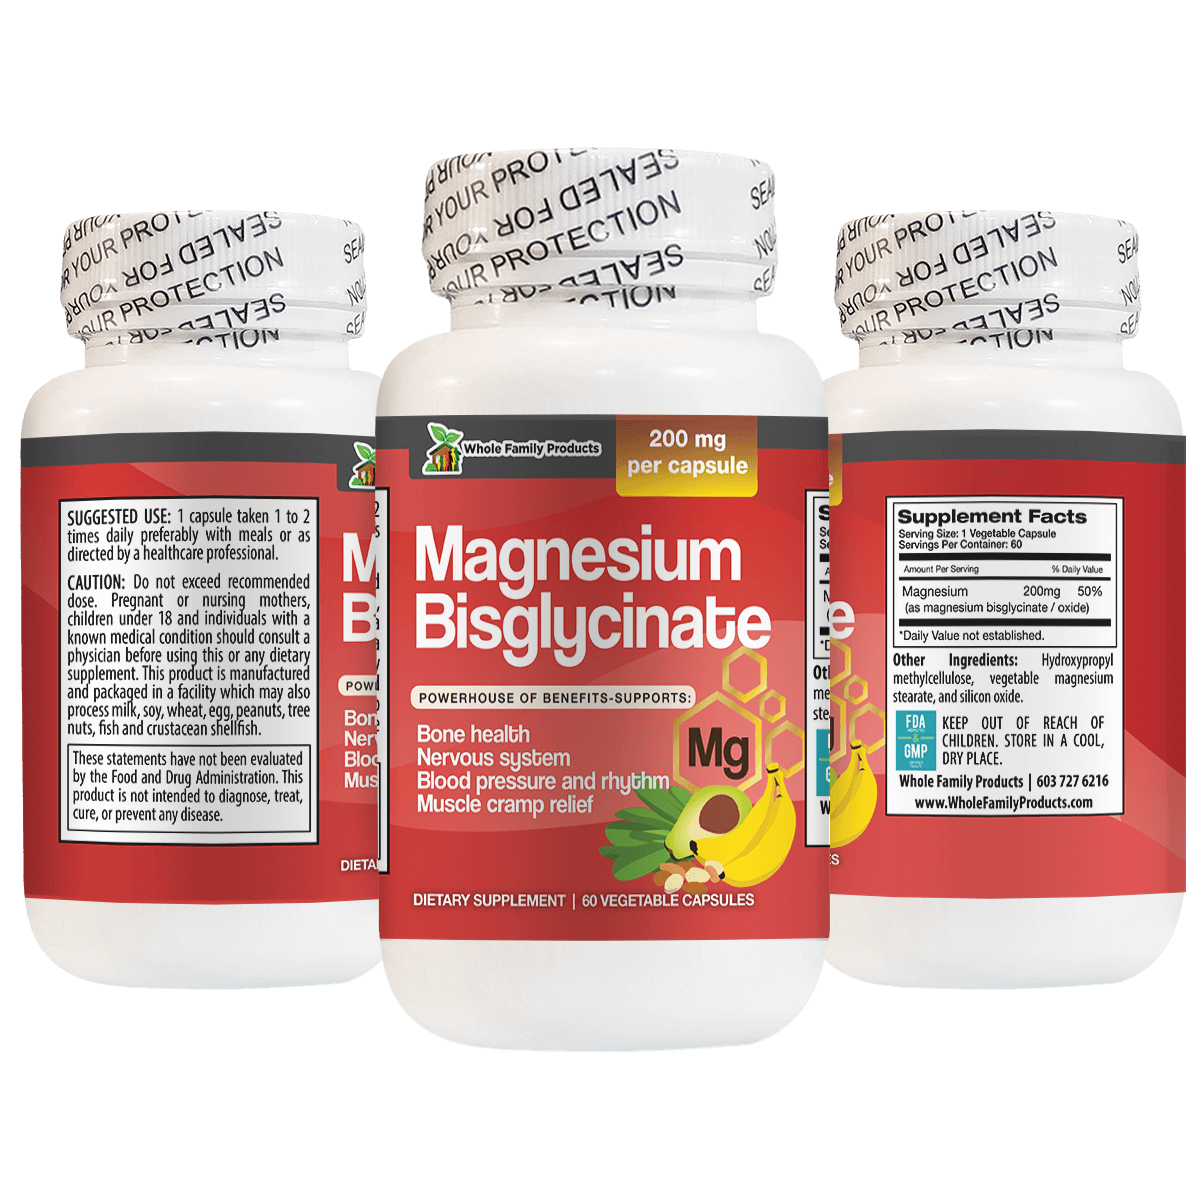 Magnesium Bisglycinate Supports Blood Pressure and Muscle Cramp Relief